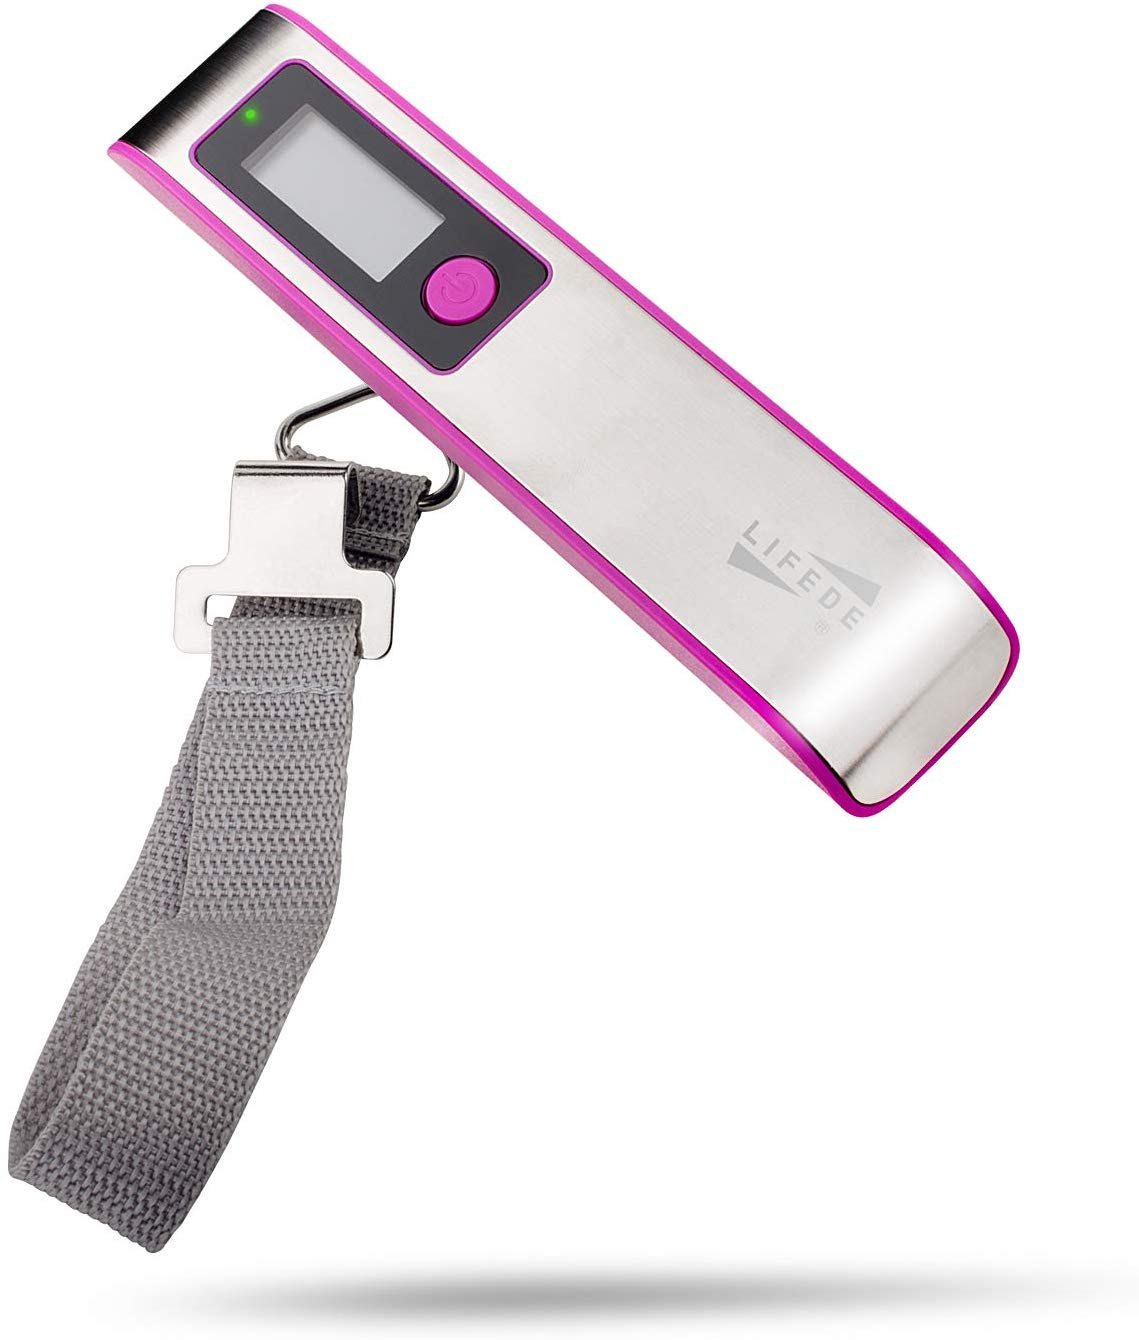 handheld digital scale for luggage